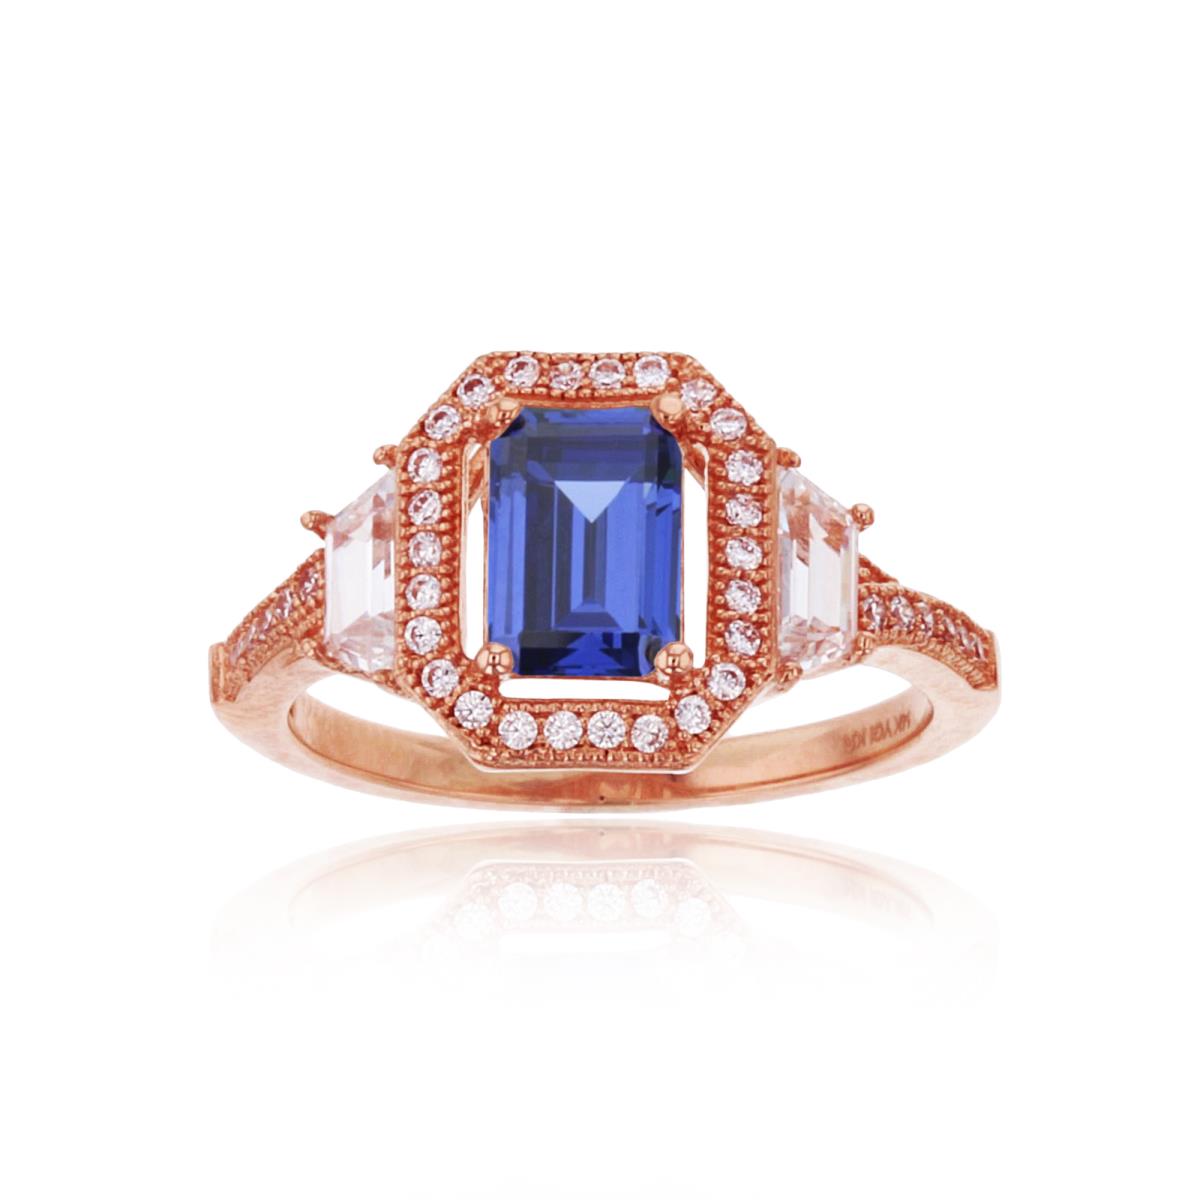 10K Rose Gold 7x5mm Tanzanite Emerald Cut with Baguette & Rd CZ Engagement Ring